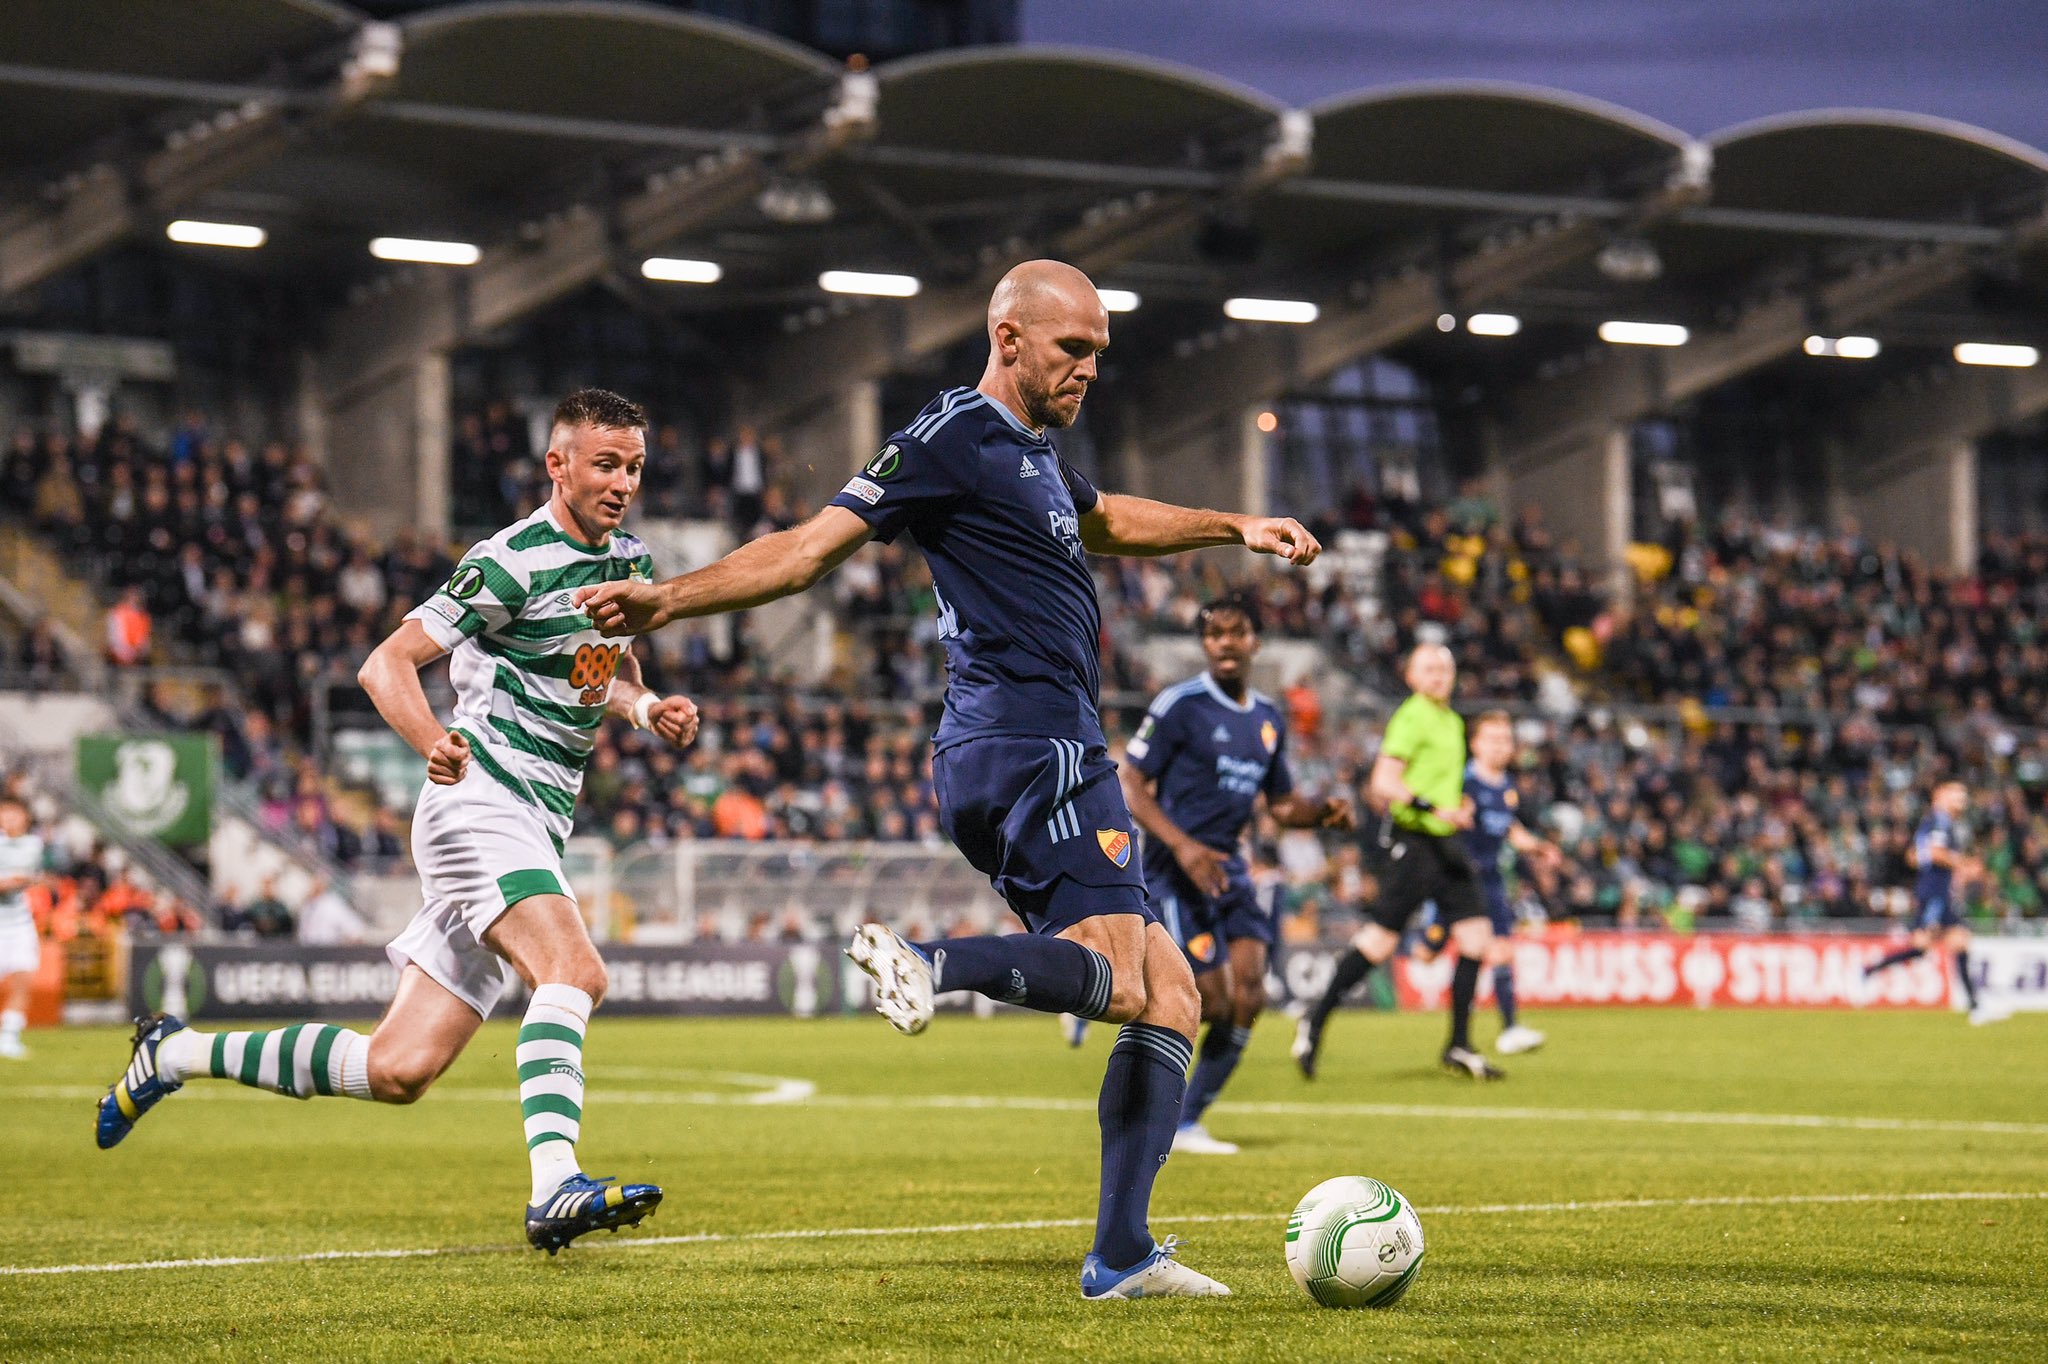 The match between Shamrock Rovers and Djurgardens ended in a draw (@DIF_Footboll)